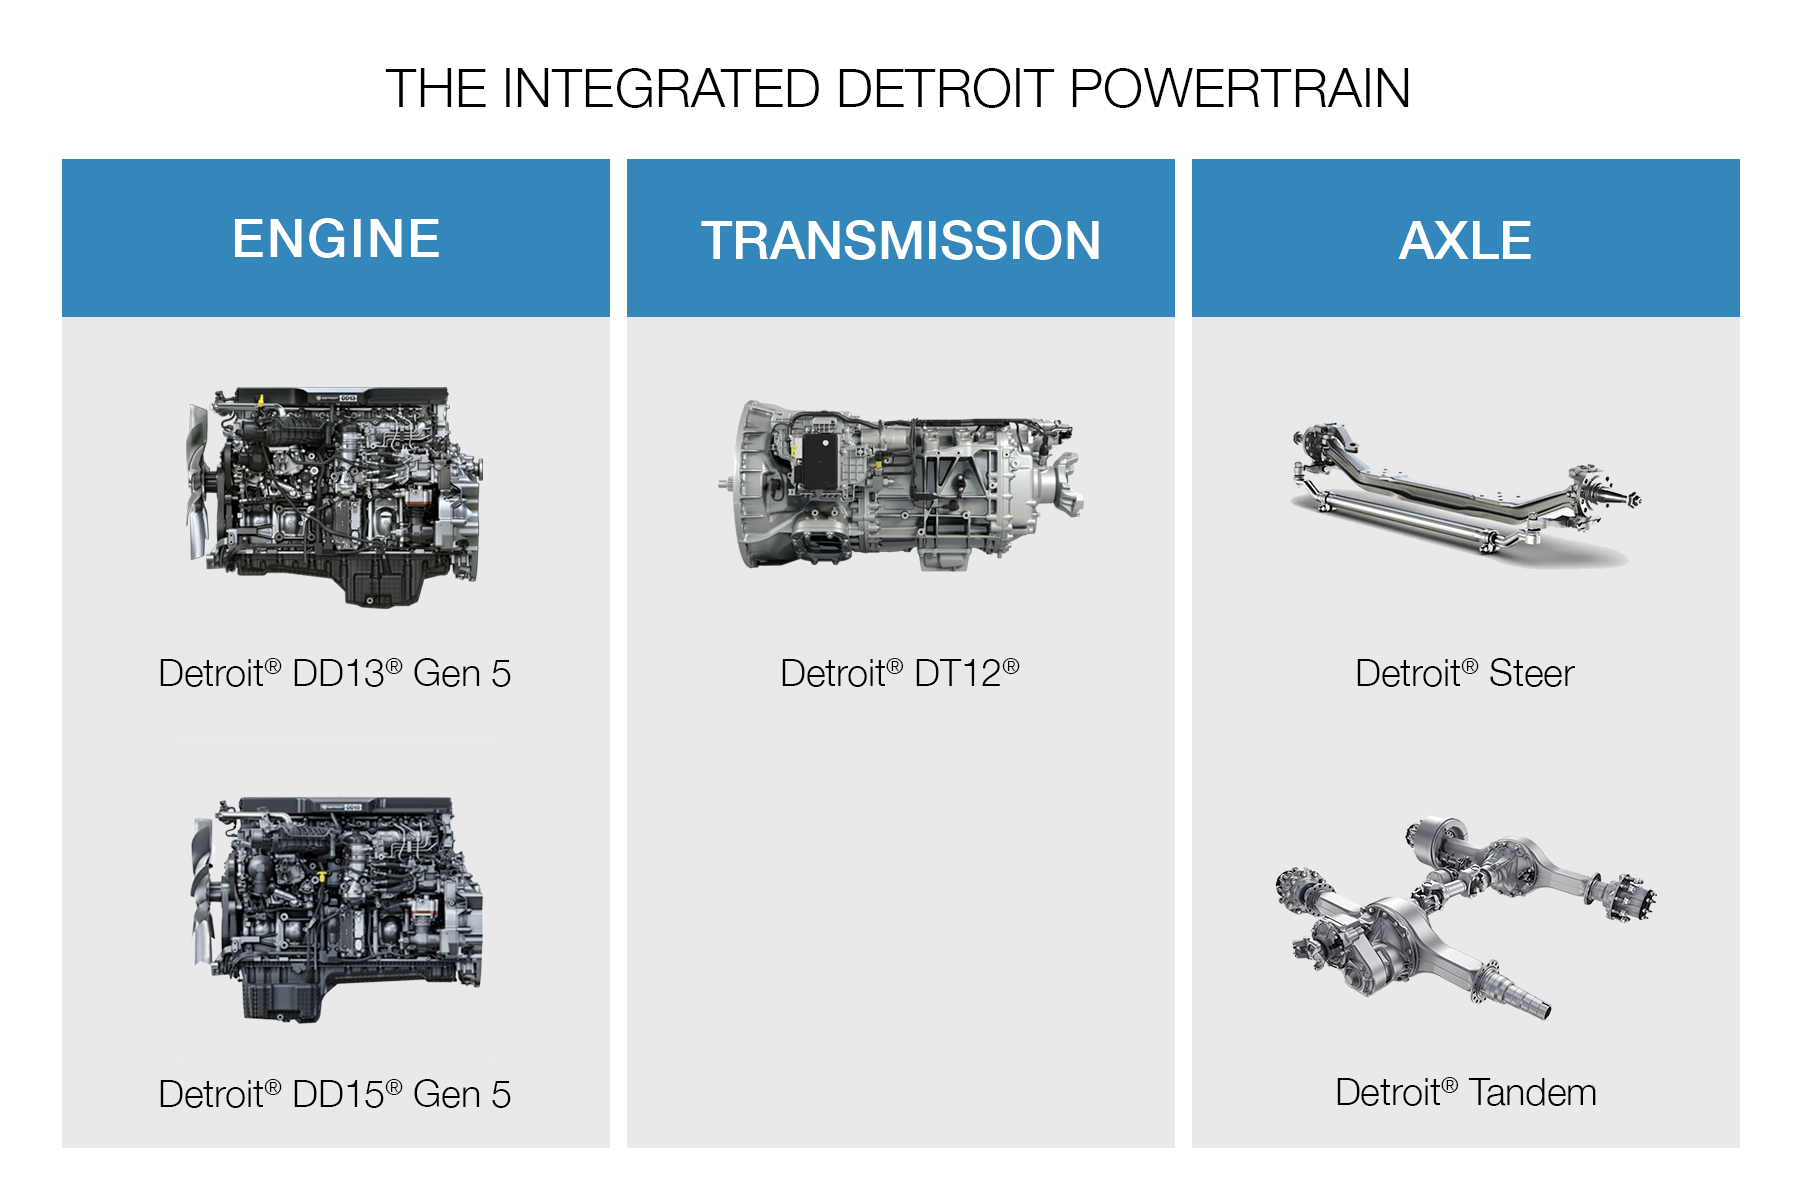 A chart that details the different parts of the integrated Detroit powertrain. The Detroit DD13 and Detroit DD15 are in the engine column. The Detroit DT12 is in the transmission column. And the Detroit Steer and Detroit Tandem are in the axle column.